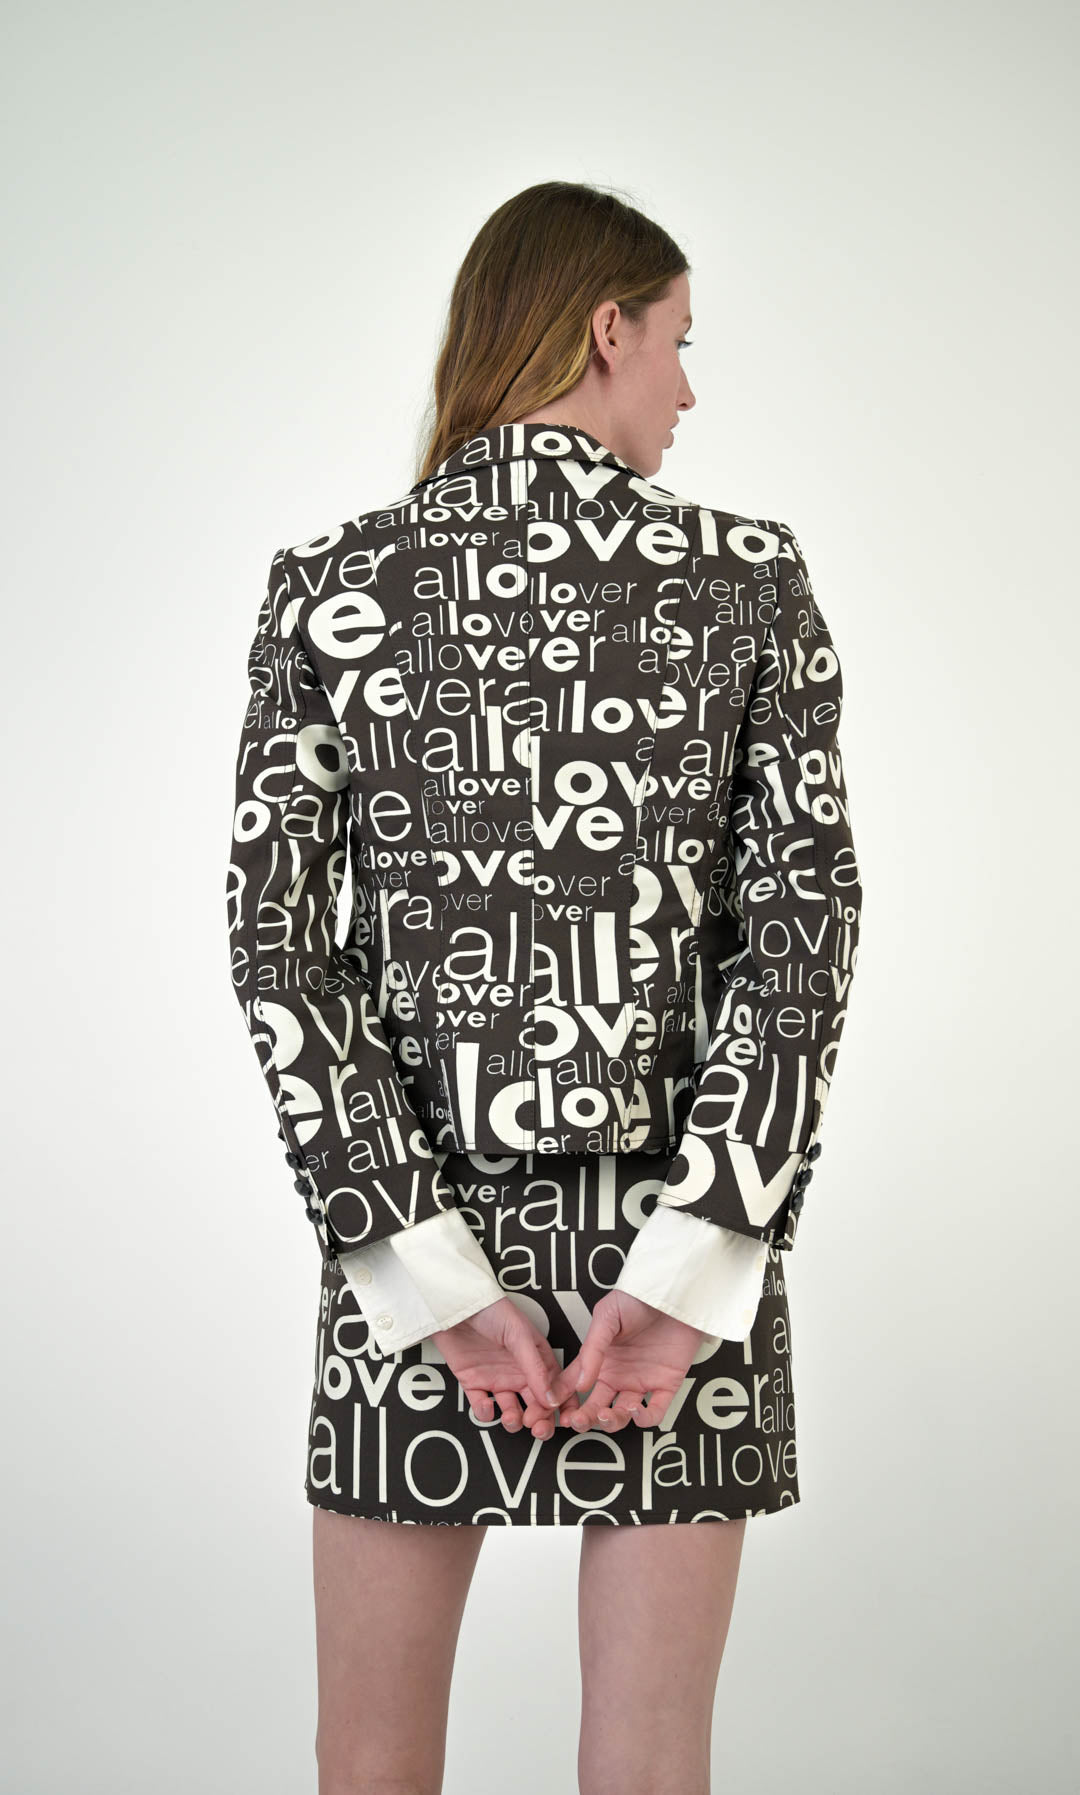 Moschino "Love All Over" Skirt Suit